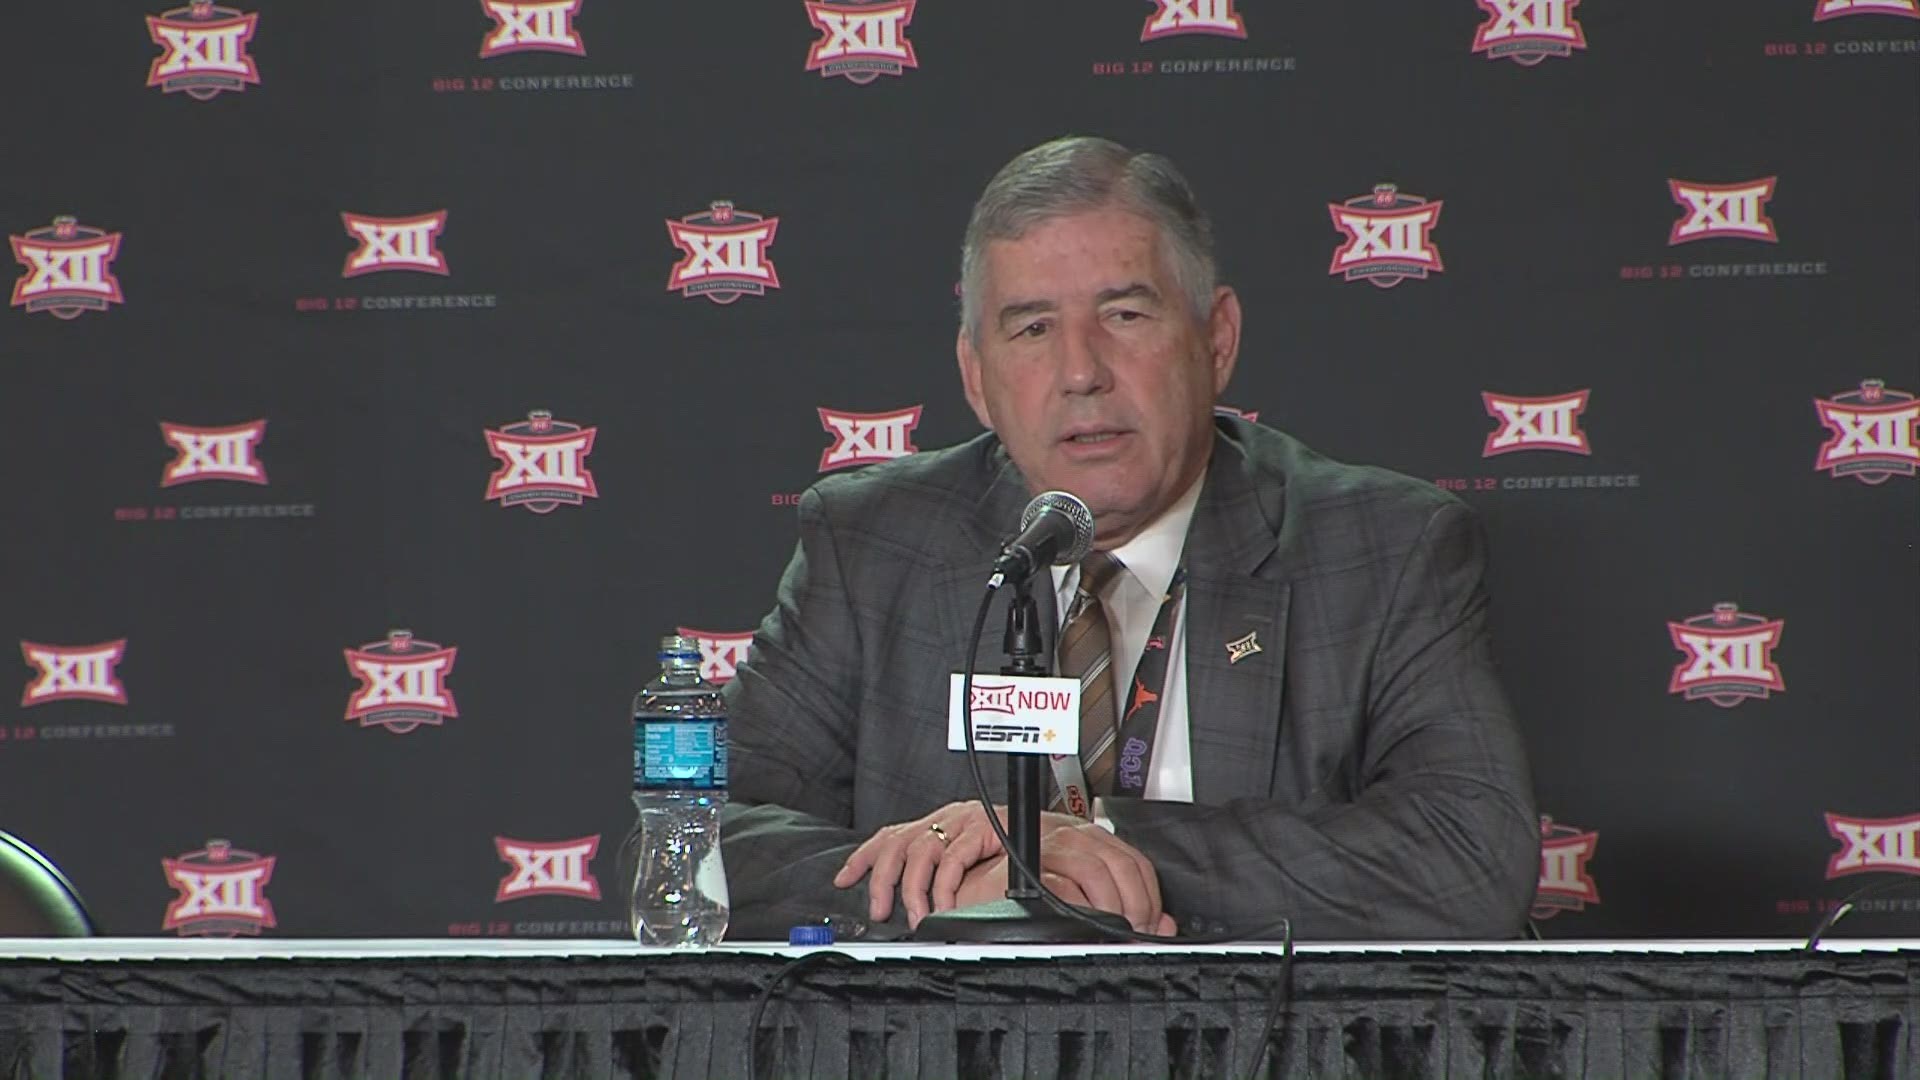 "We believe this is the right thing," Big 12 Commissioner Bob Bowlsby said.